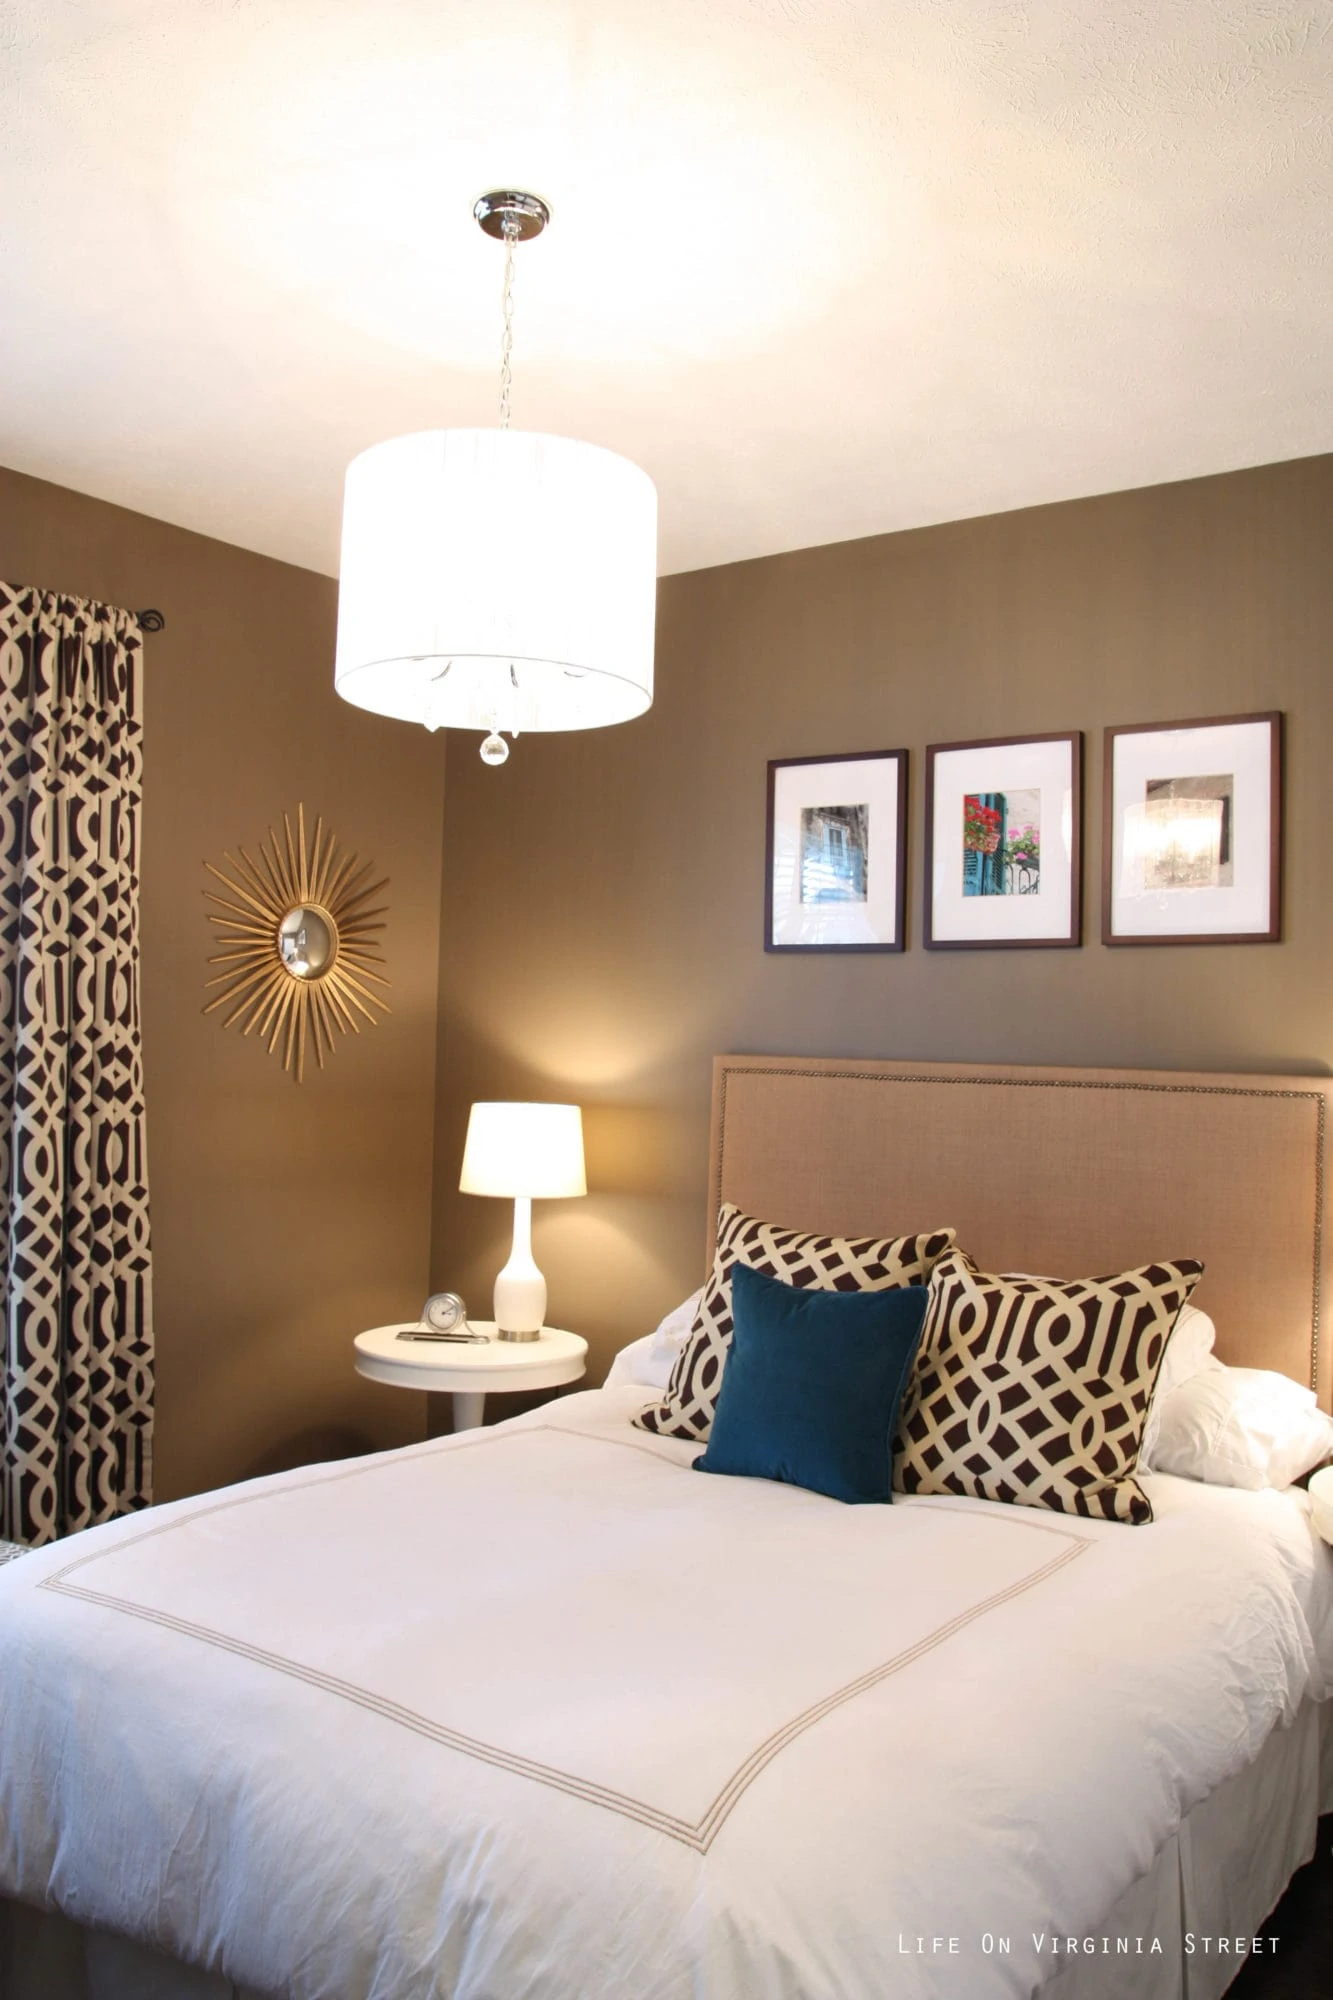 A medium brown guest bedroom with white bedding a brown and turquoise pillows on the bed.